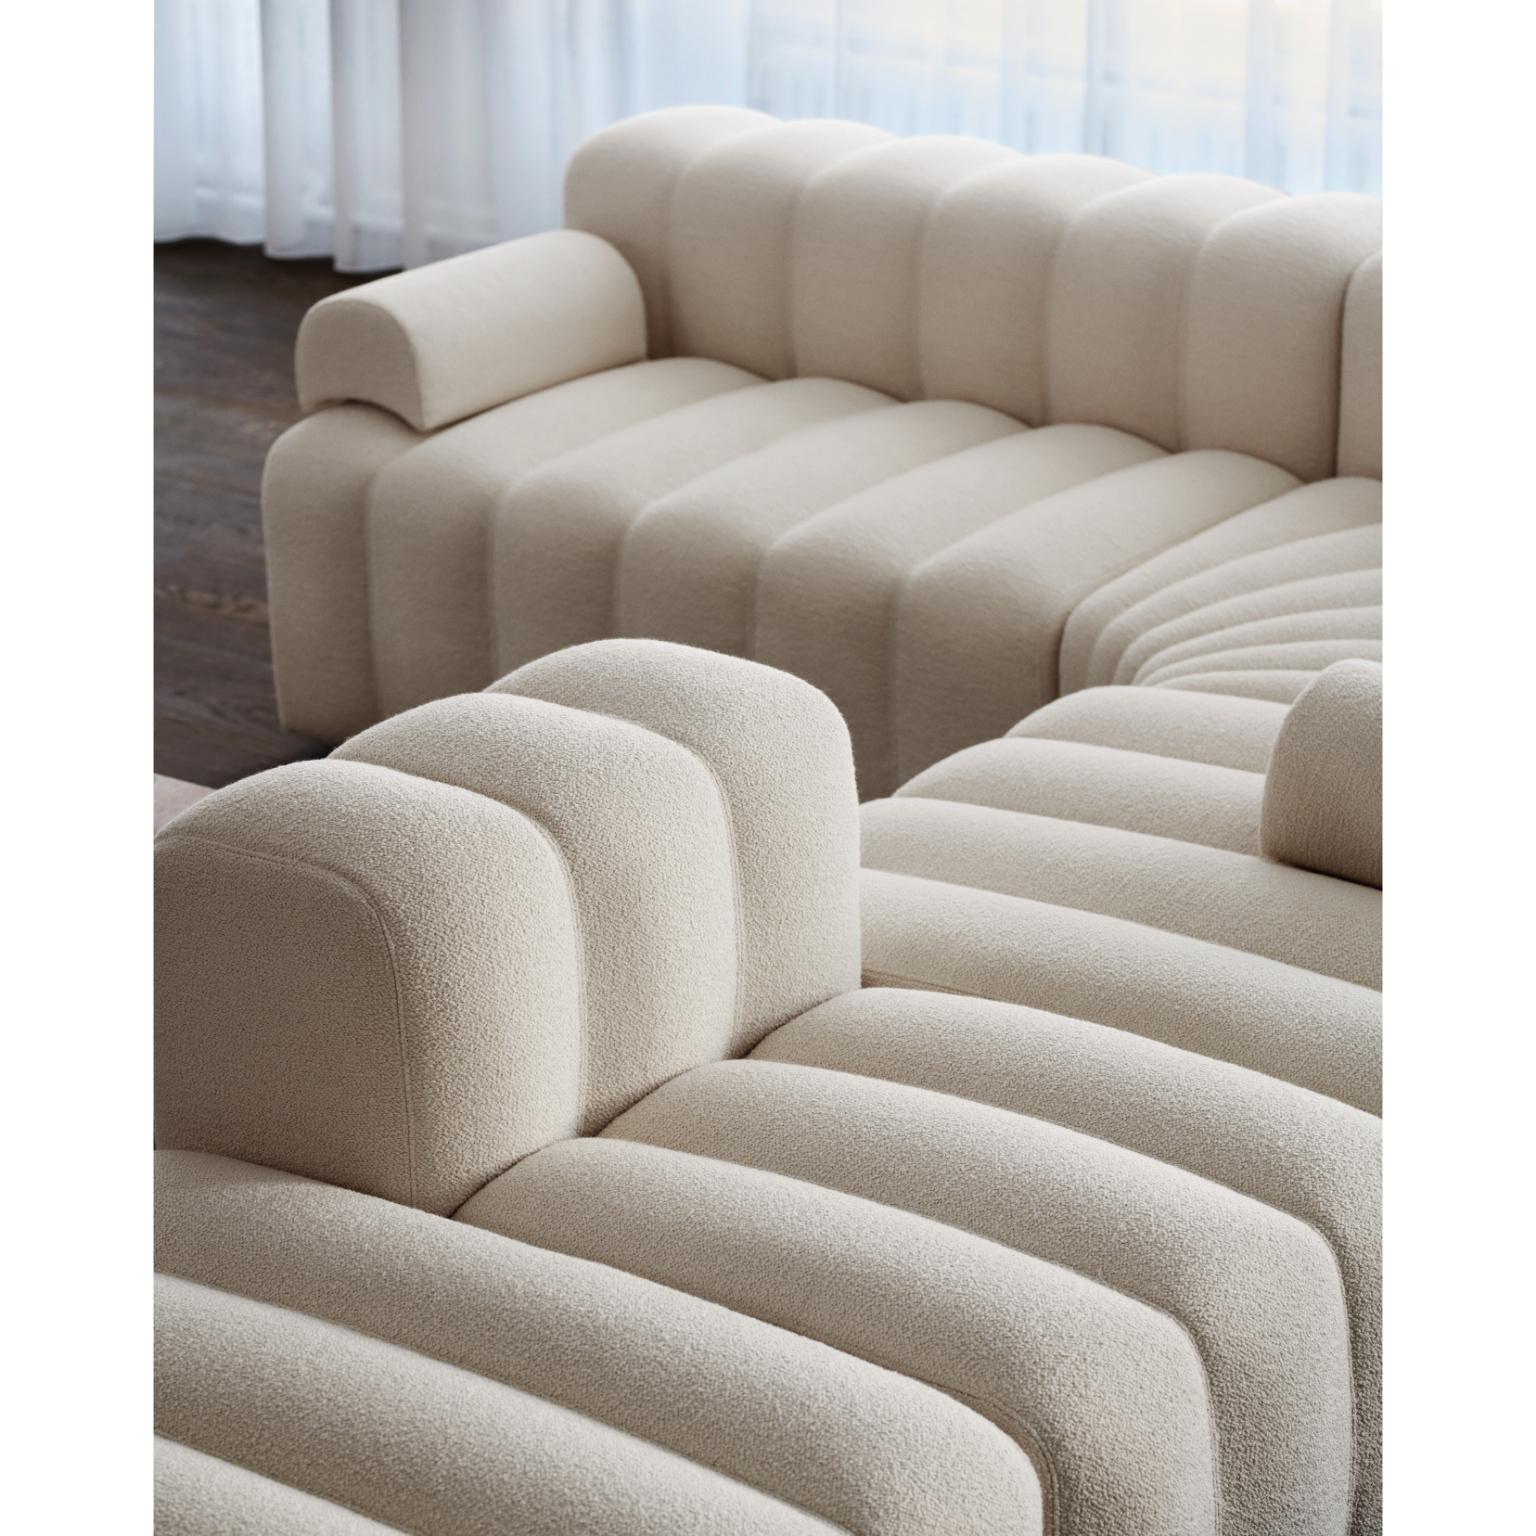 Studio Lounge Small Left Modular Sofa With Short Armrest by NORR11
Dimensions: D 130 x W 93 x H 70 cm. SH 47 cm. 
Materials: Foam, wood and upholstery.
Upholstery: Barnum Boucle Color 3.

Available in different upholstery options. A plywood